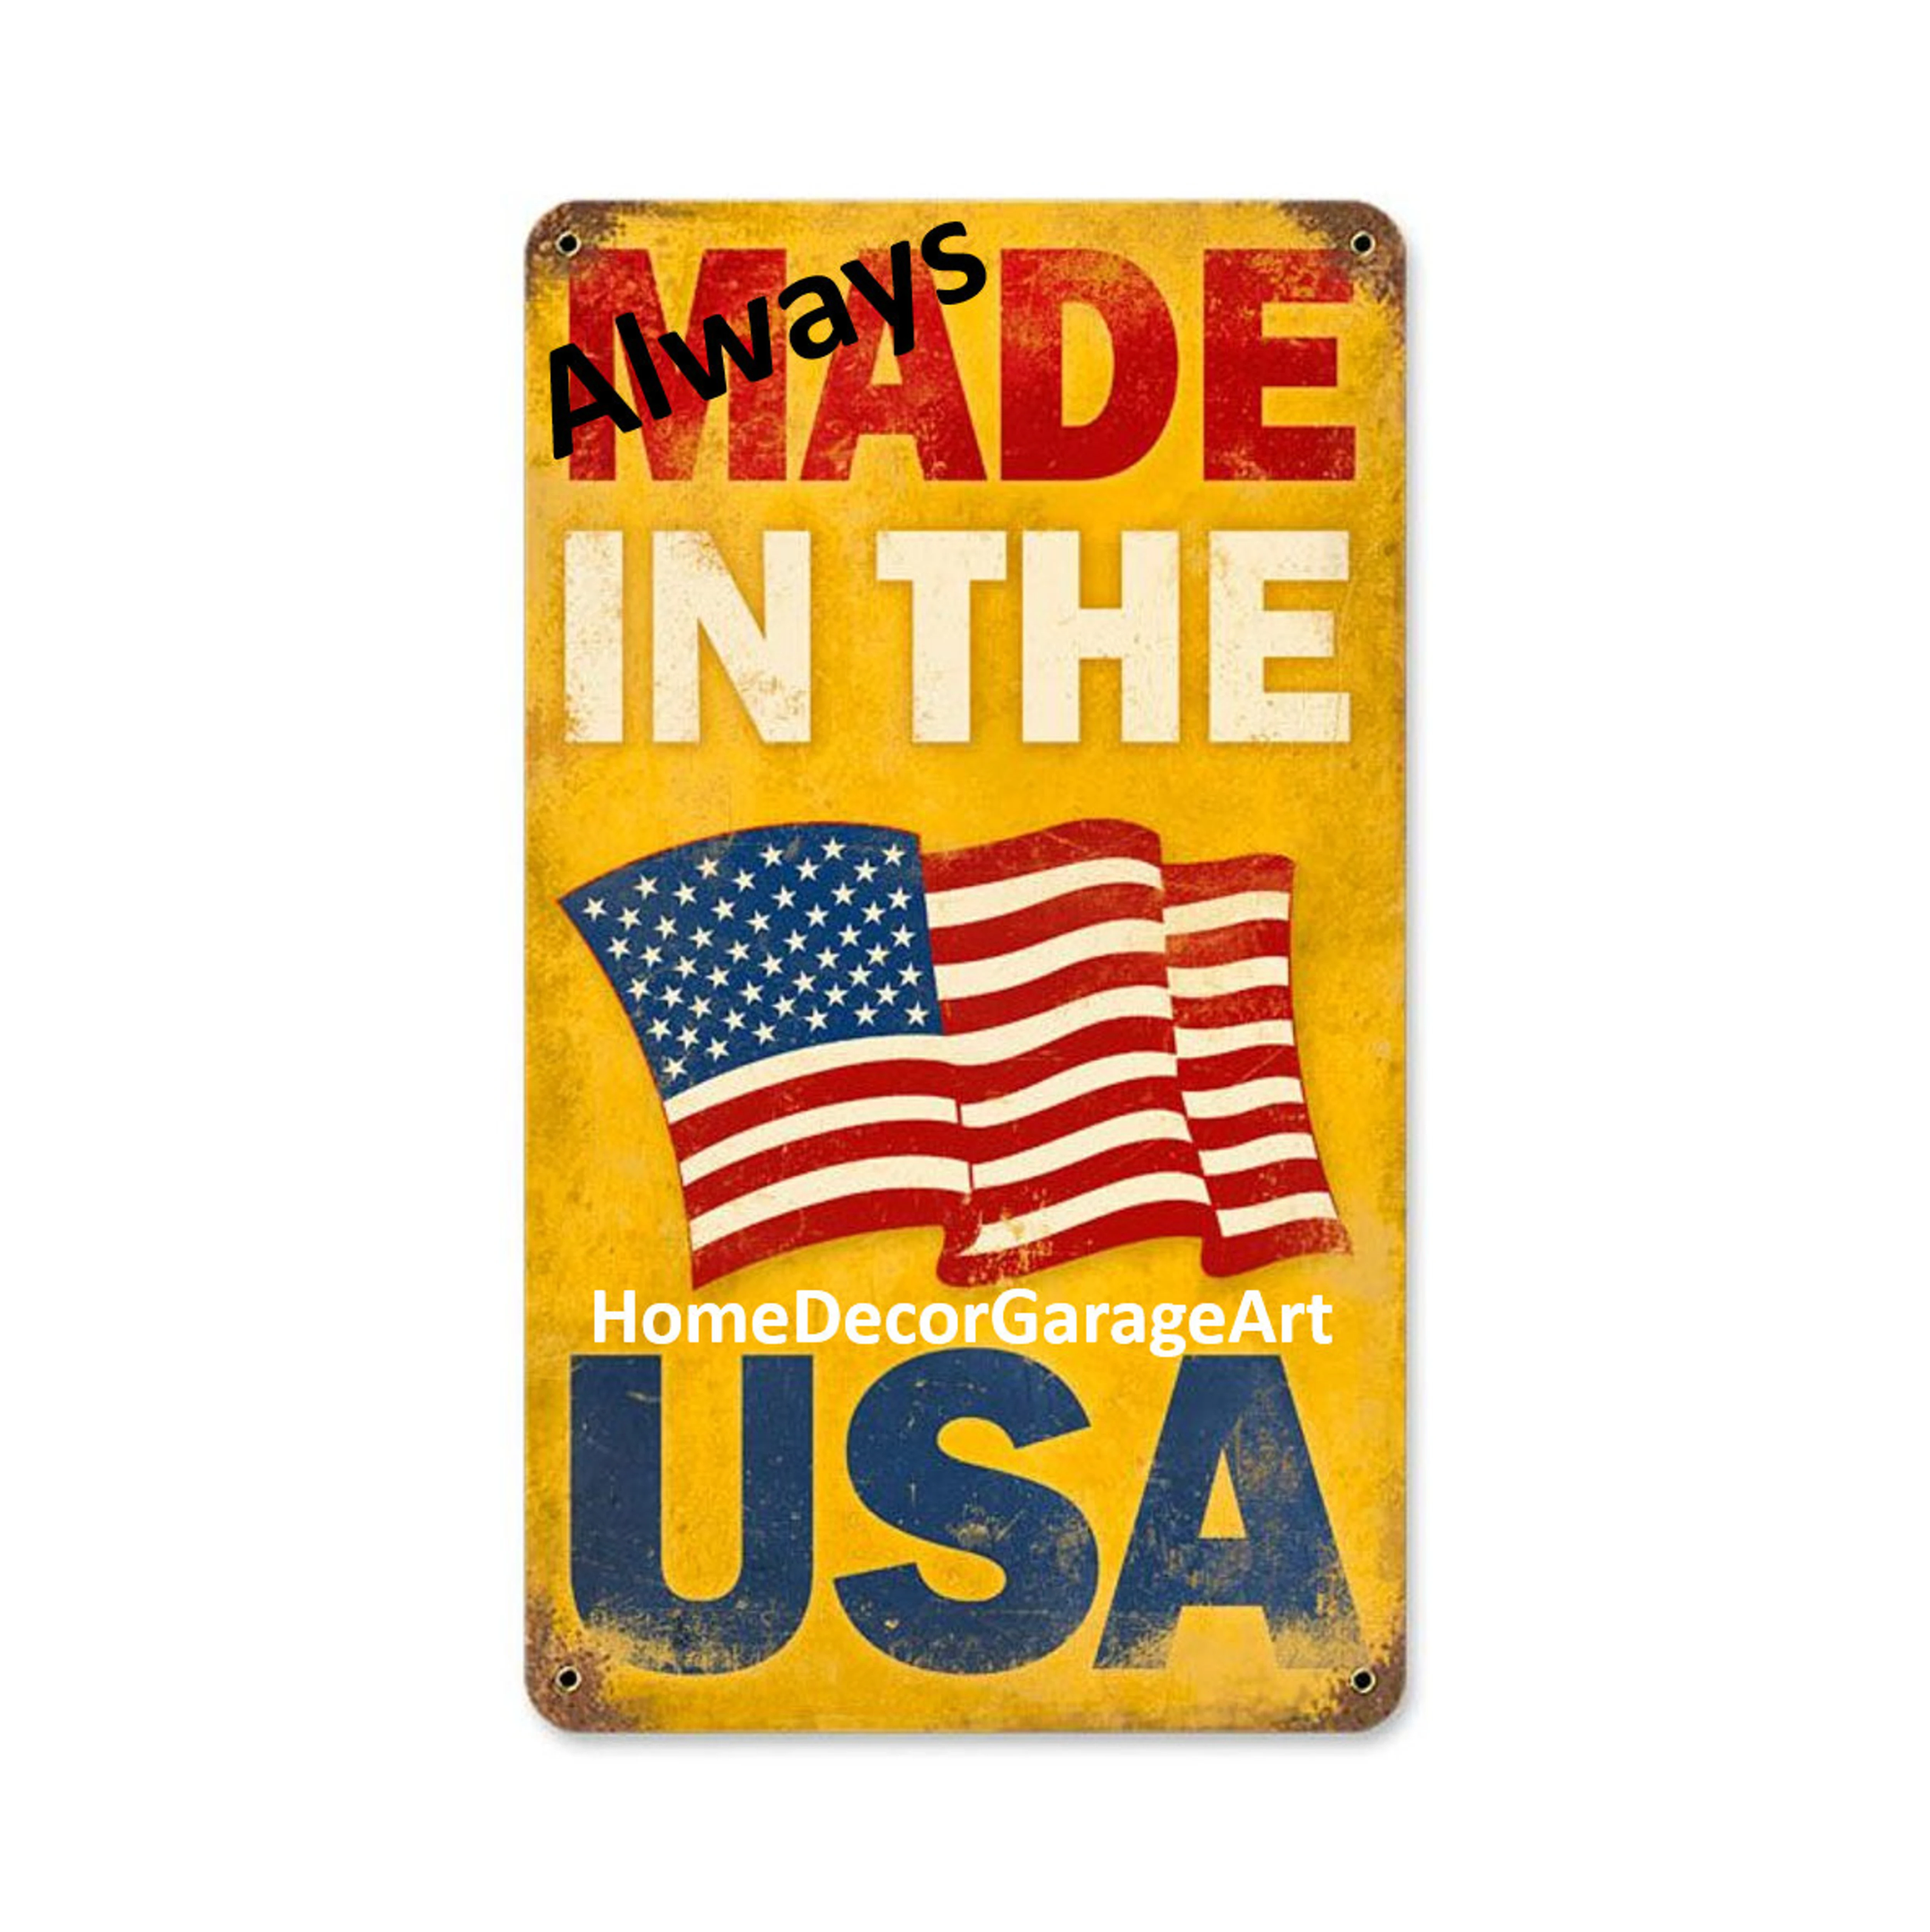 United States Hot Rod USA Map 25 x 16 Inches Metal Sign American Made Vintage Style Retro Garage Art LG652 PS